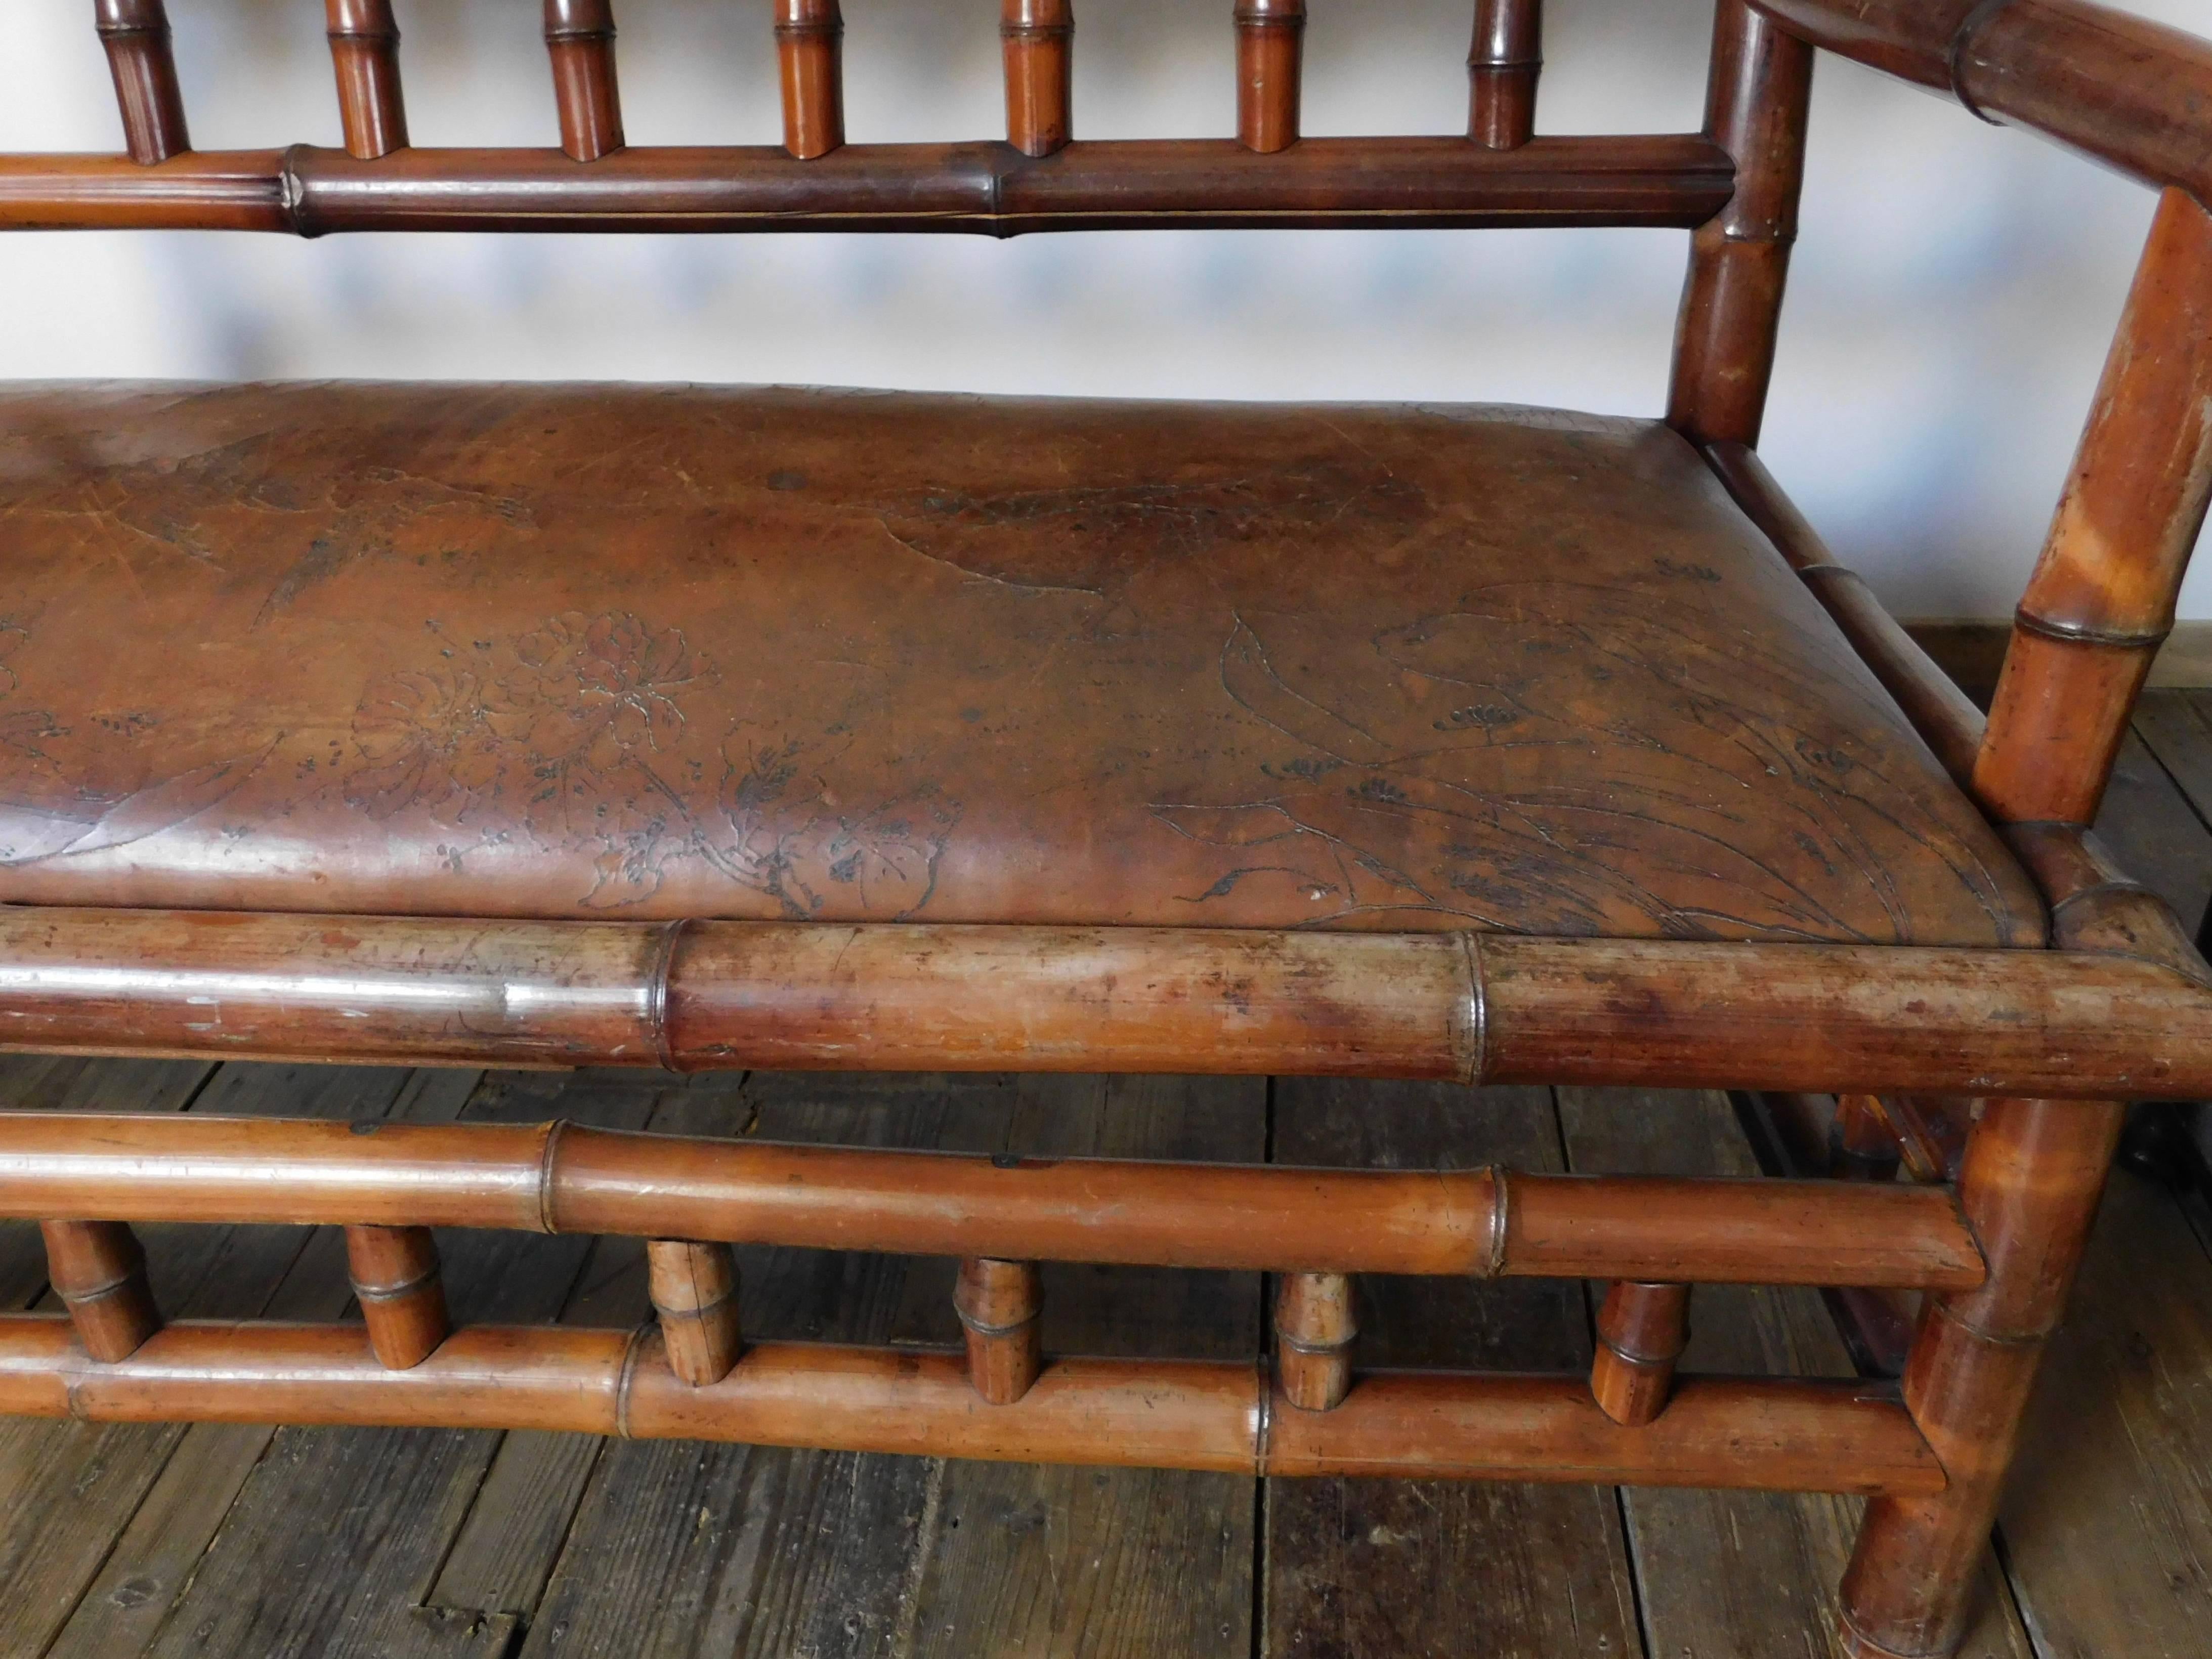 19th Century Perret Vibert Bamboo Settee with Decorated Leather Upholstery For Sale 4